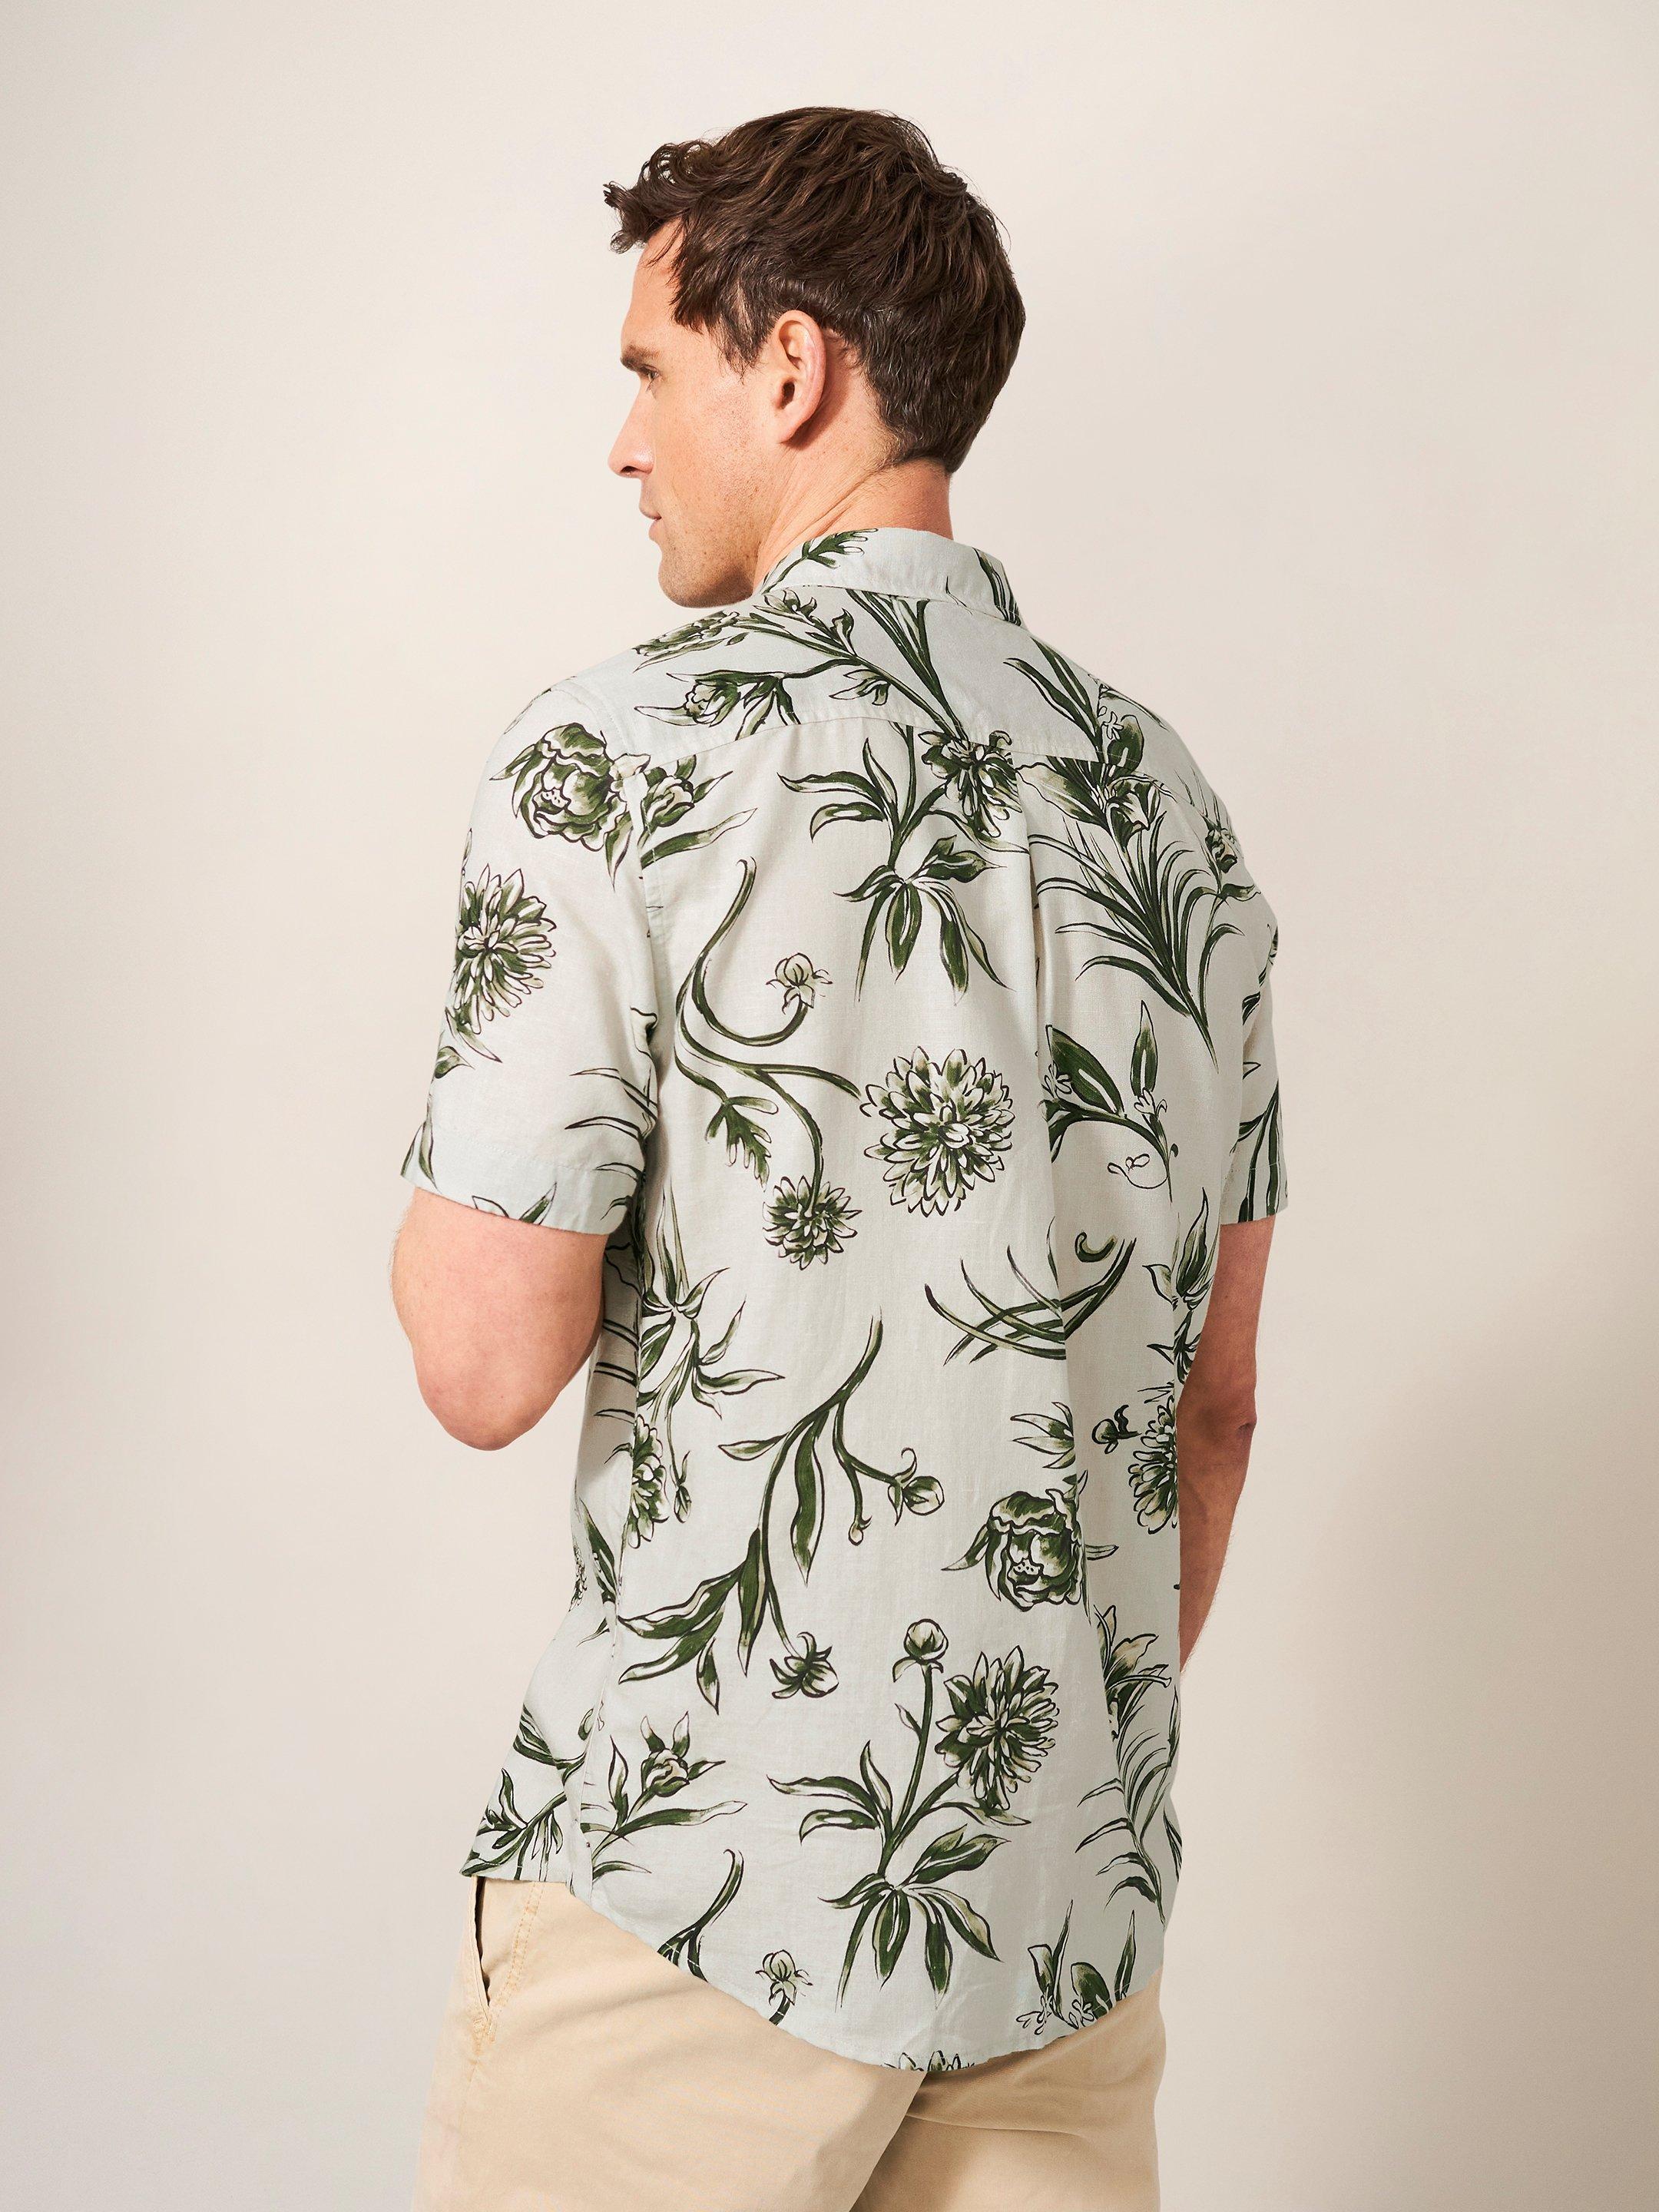 Painted Floral Shirt in KHAKI GRN - MODEL BACK